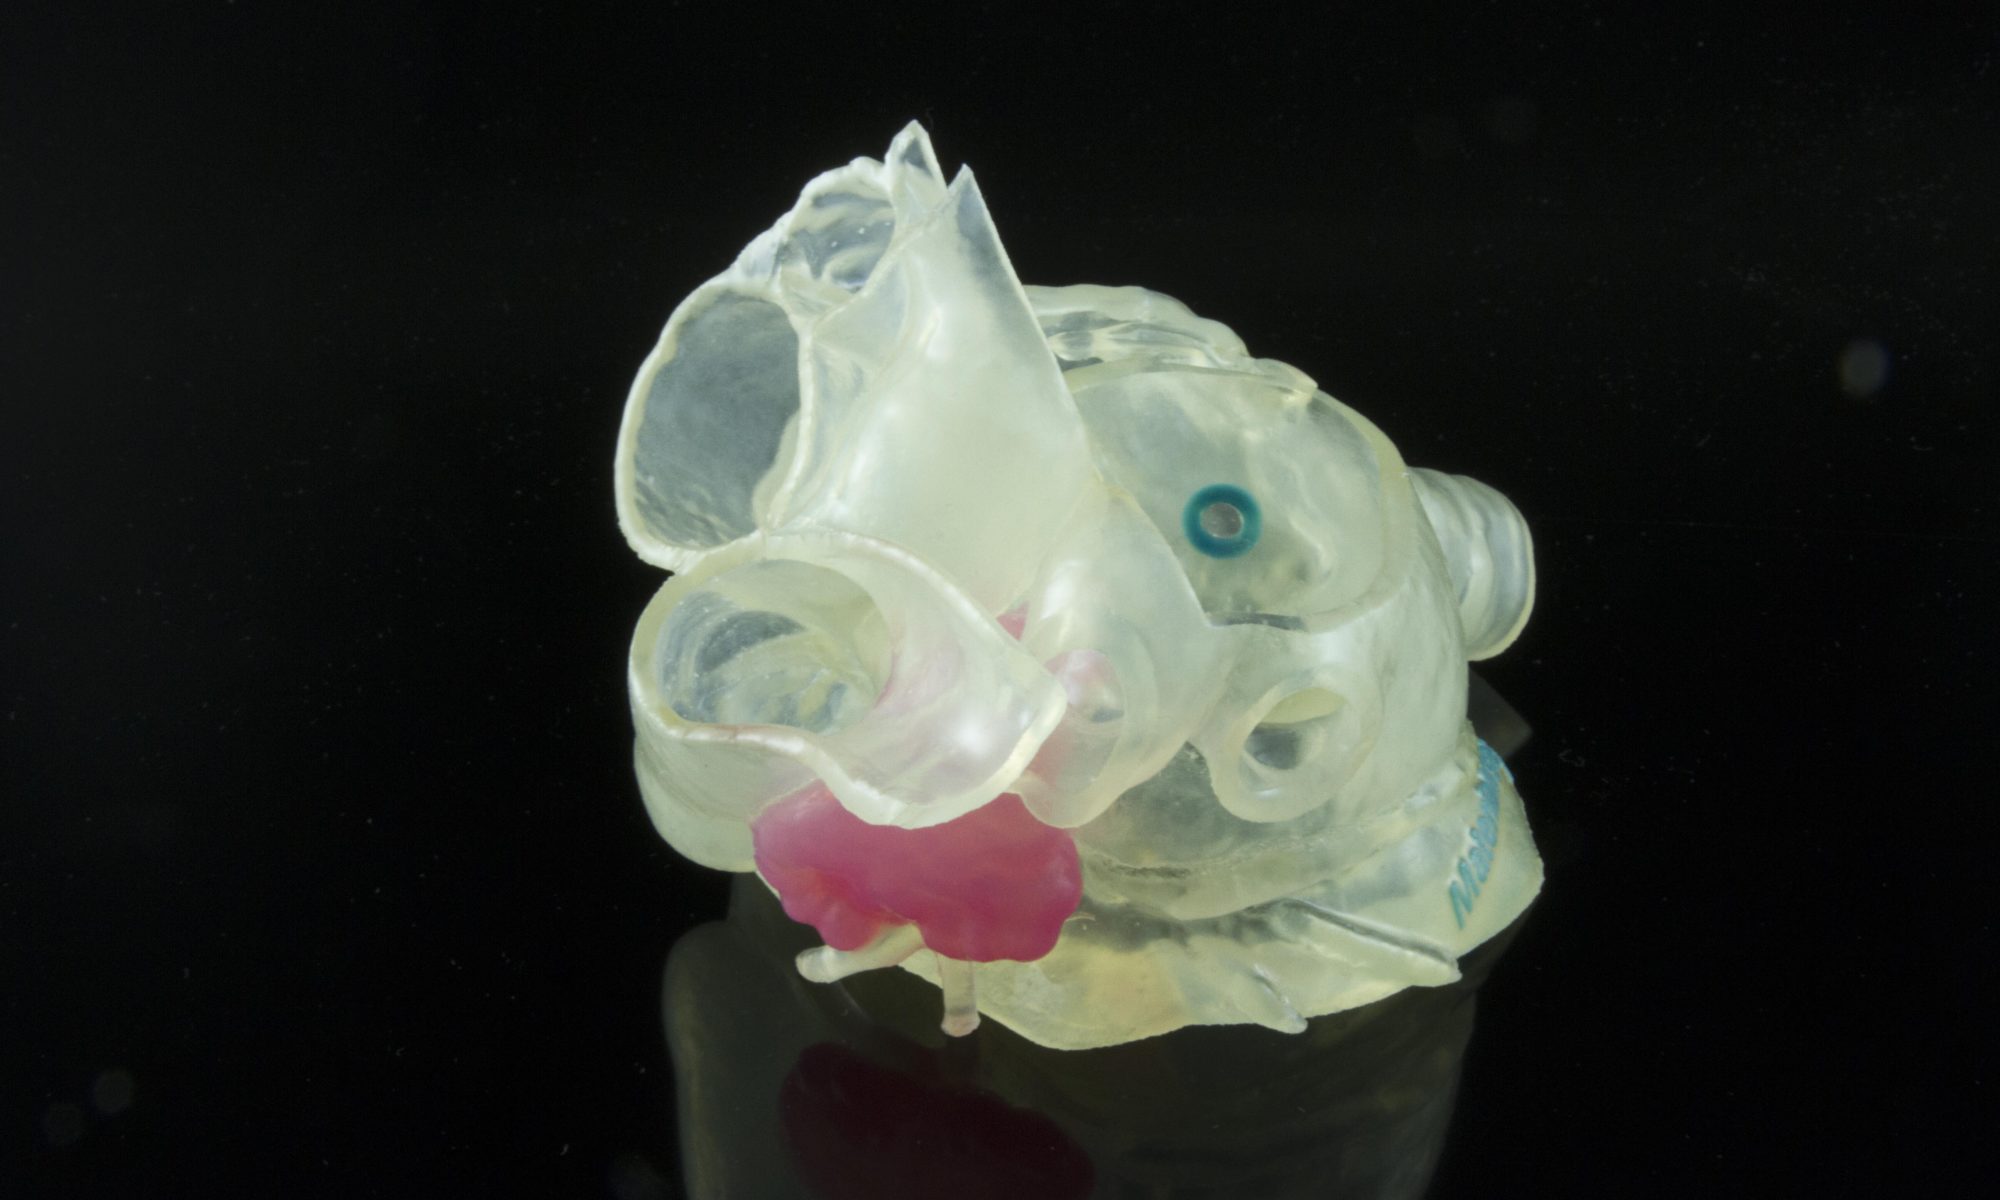 Model of patient's left atrial appendage (LAA) that allows surgeons to select the appropriate device and plan the optimal approach to occlude the LAA.